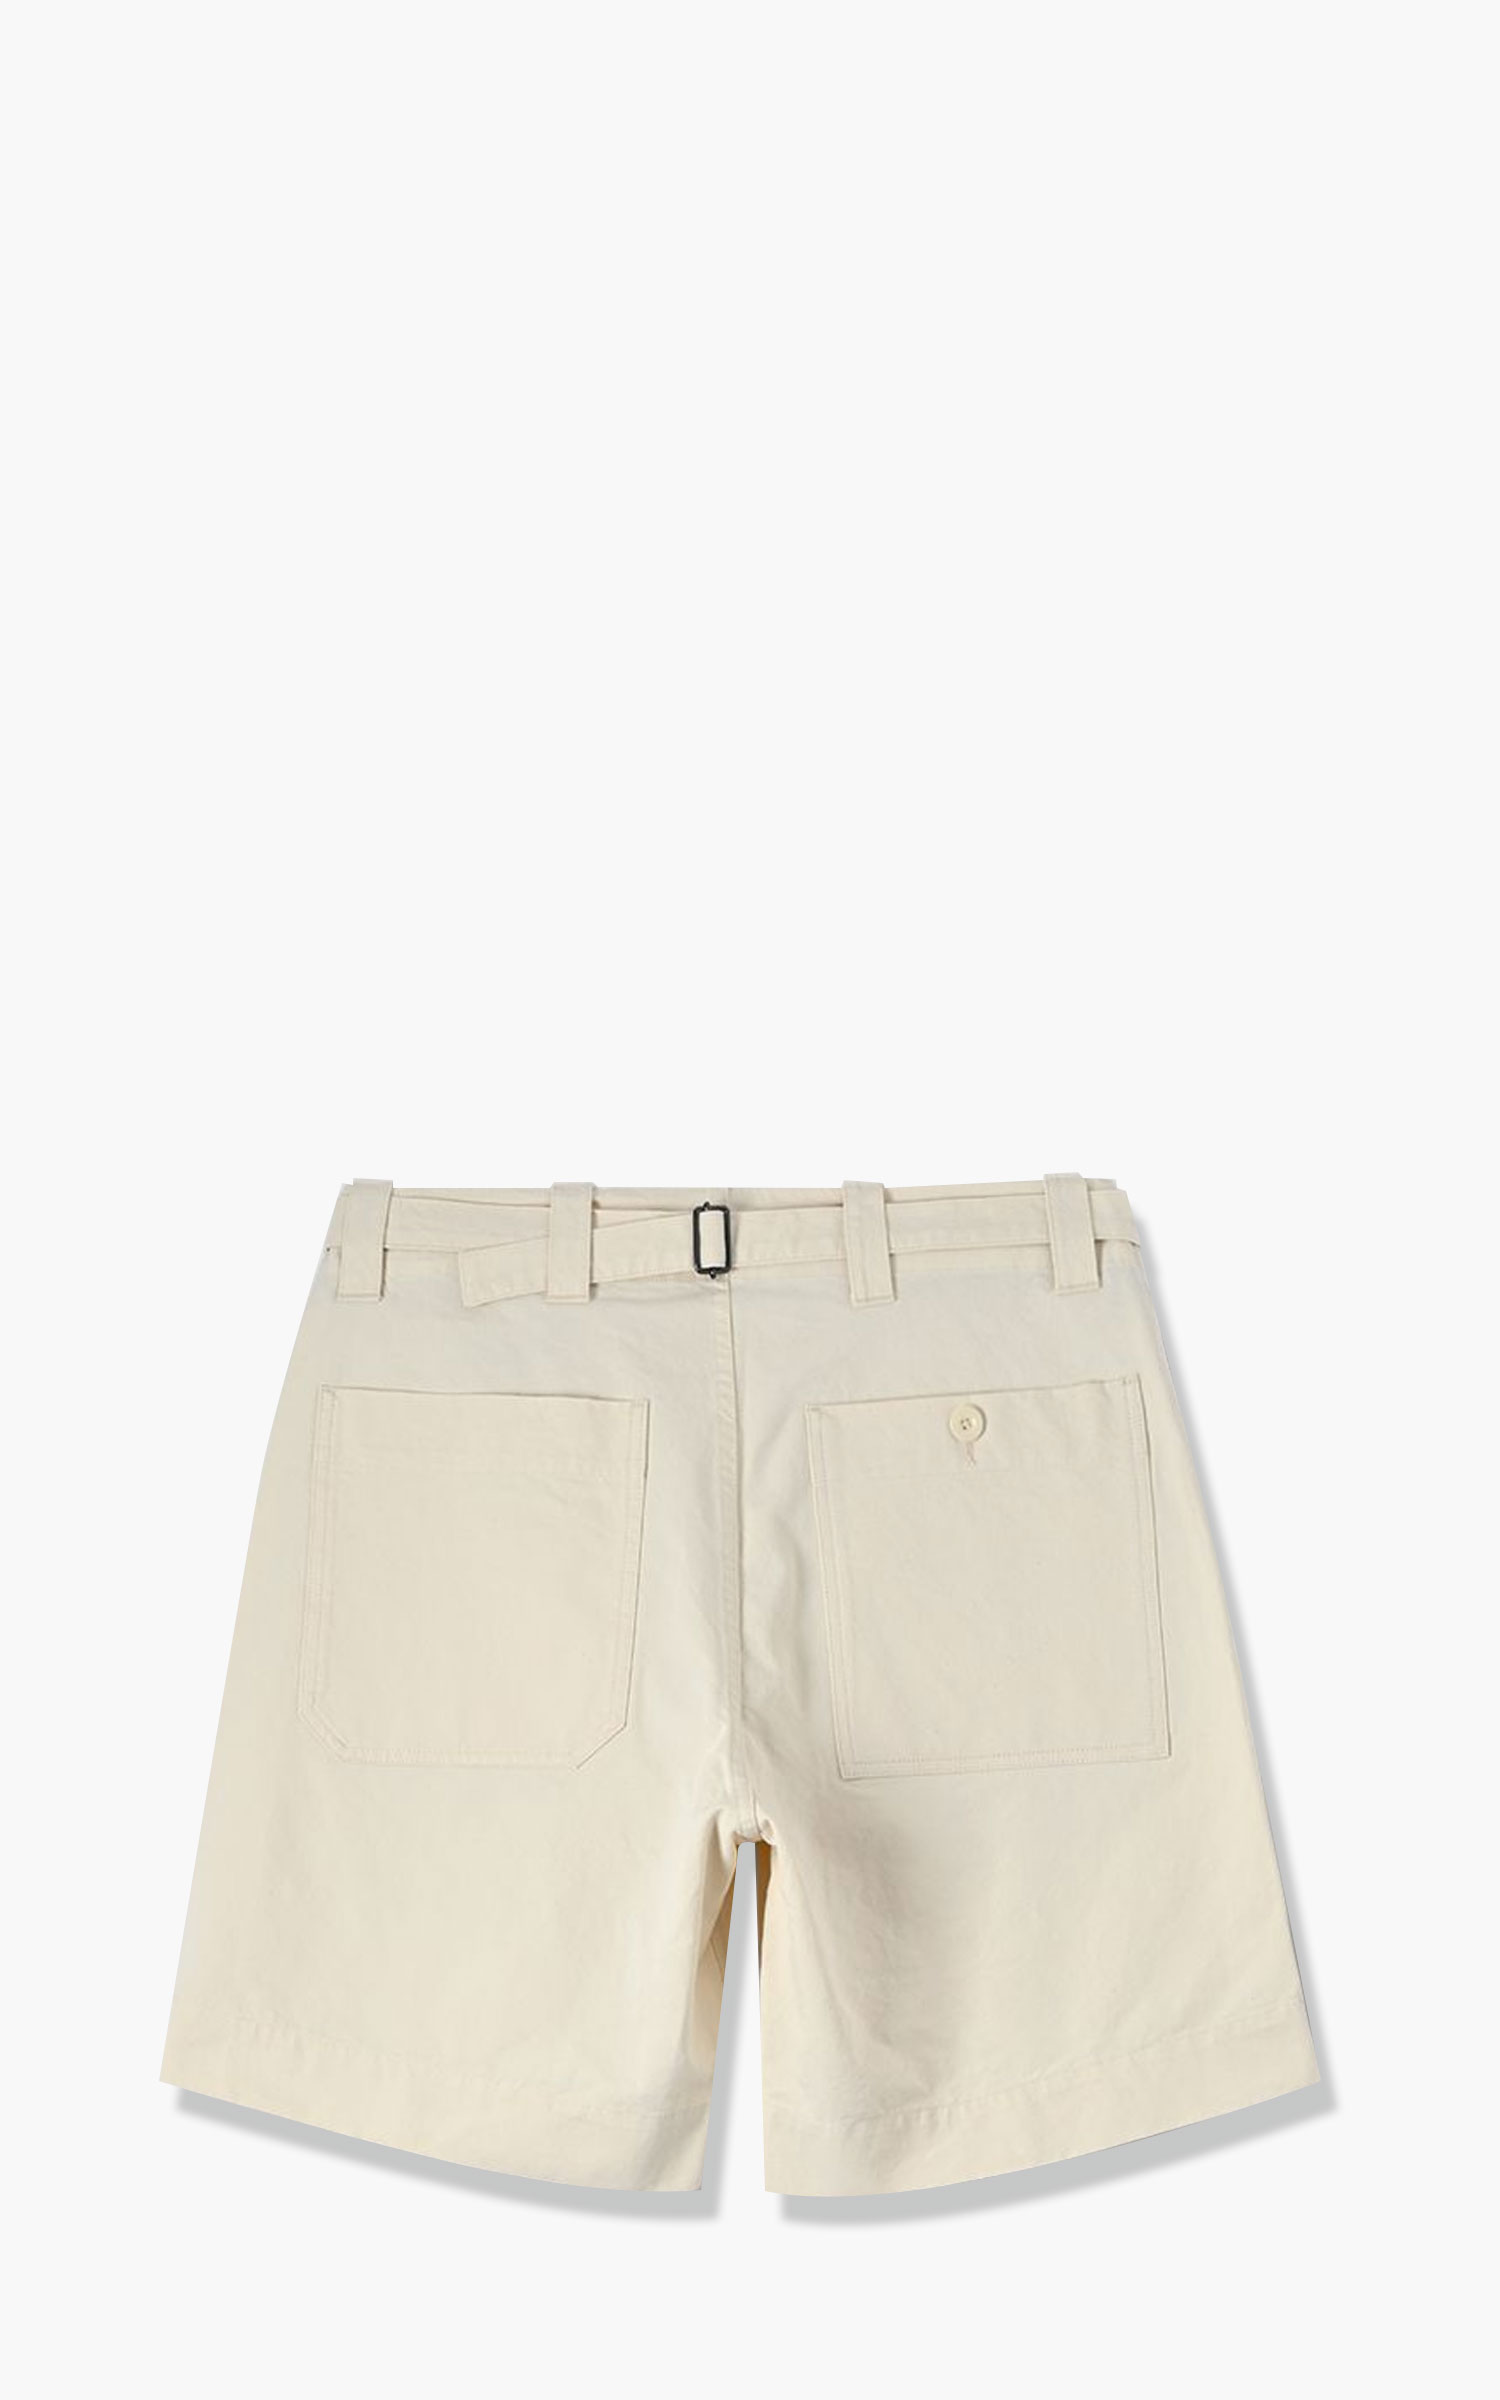 MHL. Cinch Belt Shorts Washed Compact Cotton Natural